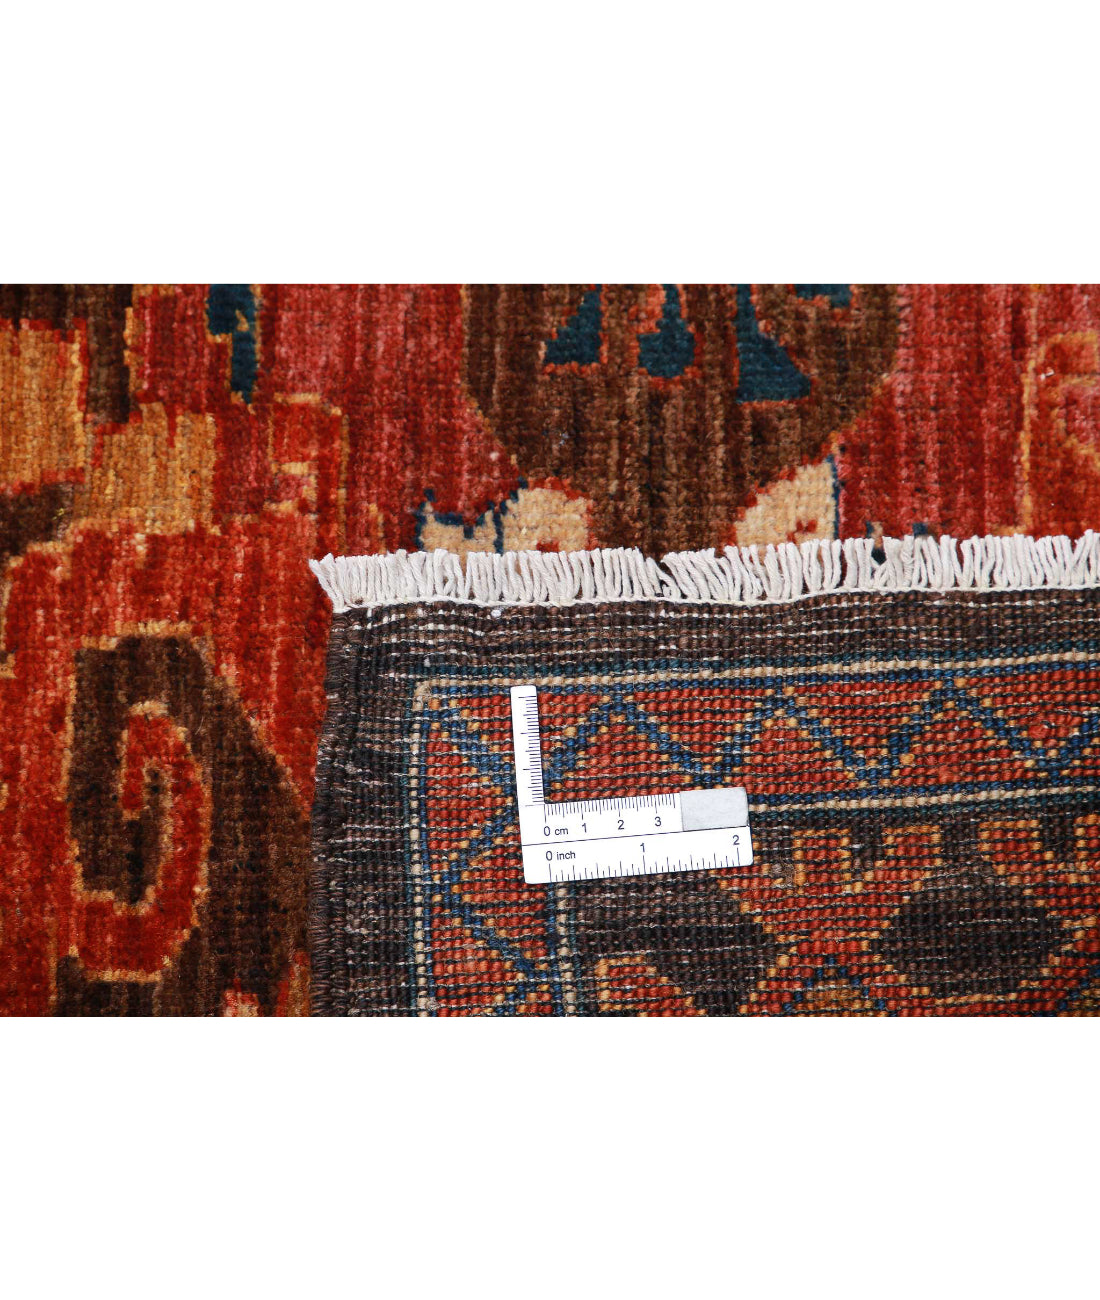 Hand Knotted Nomadic Caucasian Humna Wool Rug - 8'4'' x 9'9'' 8'4'' x 9'9'' (250 X 293) / Brown / Rust